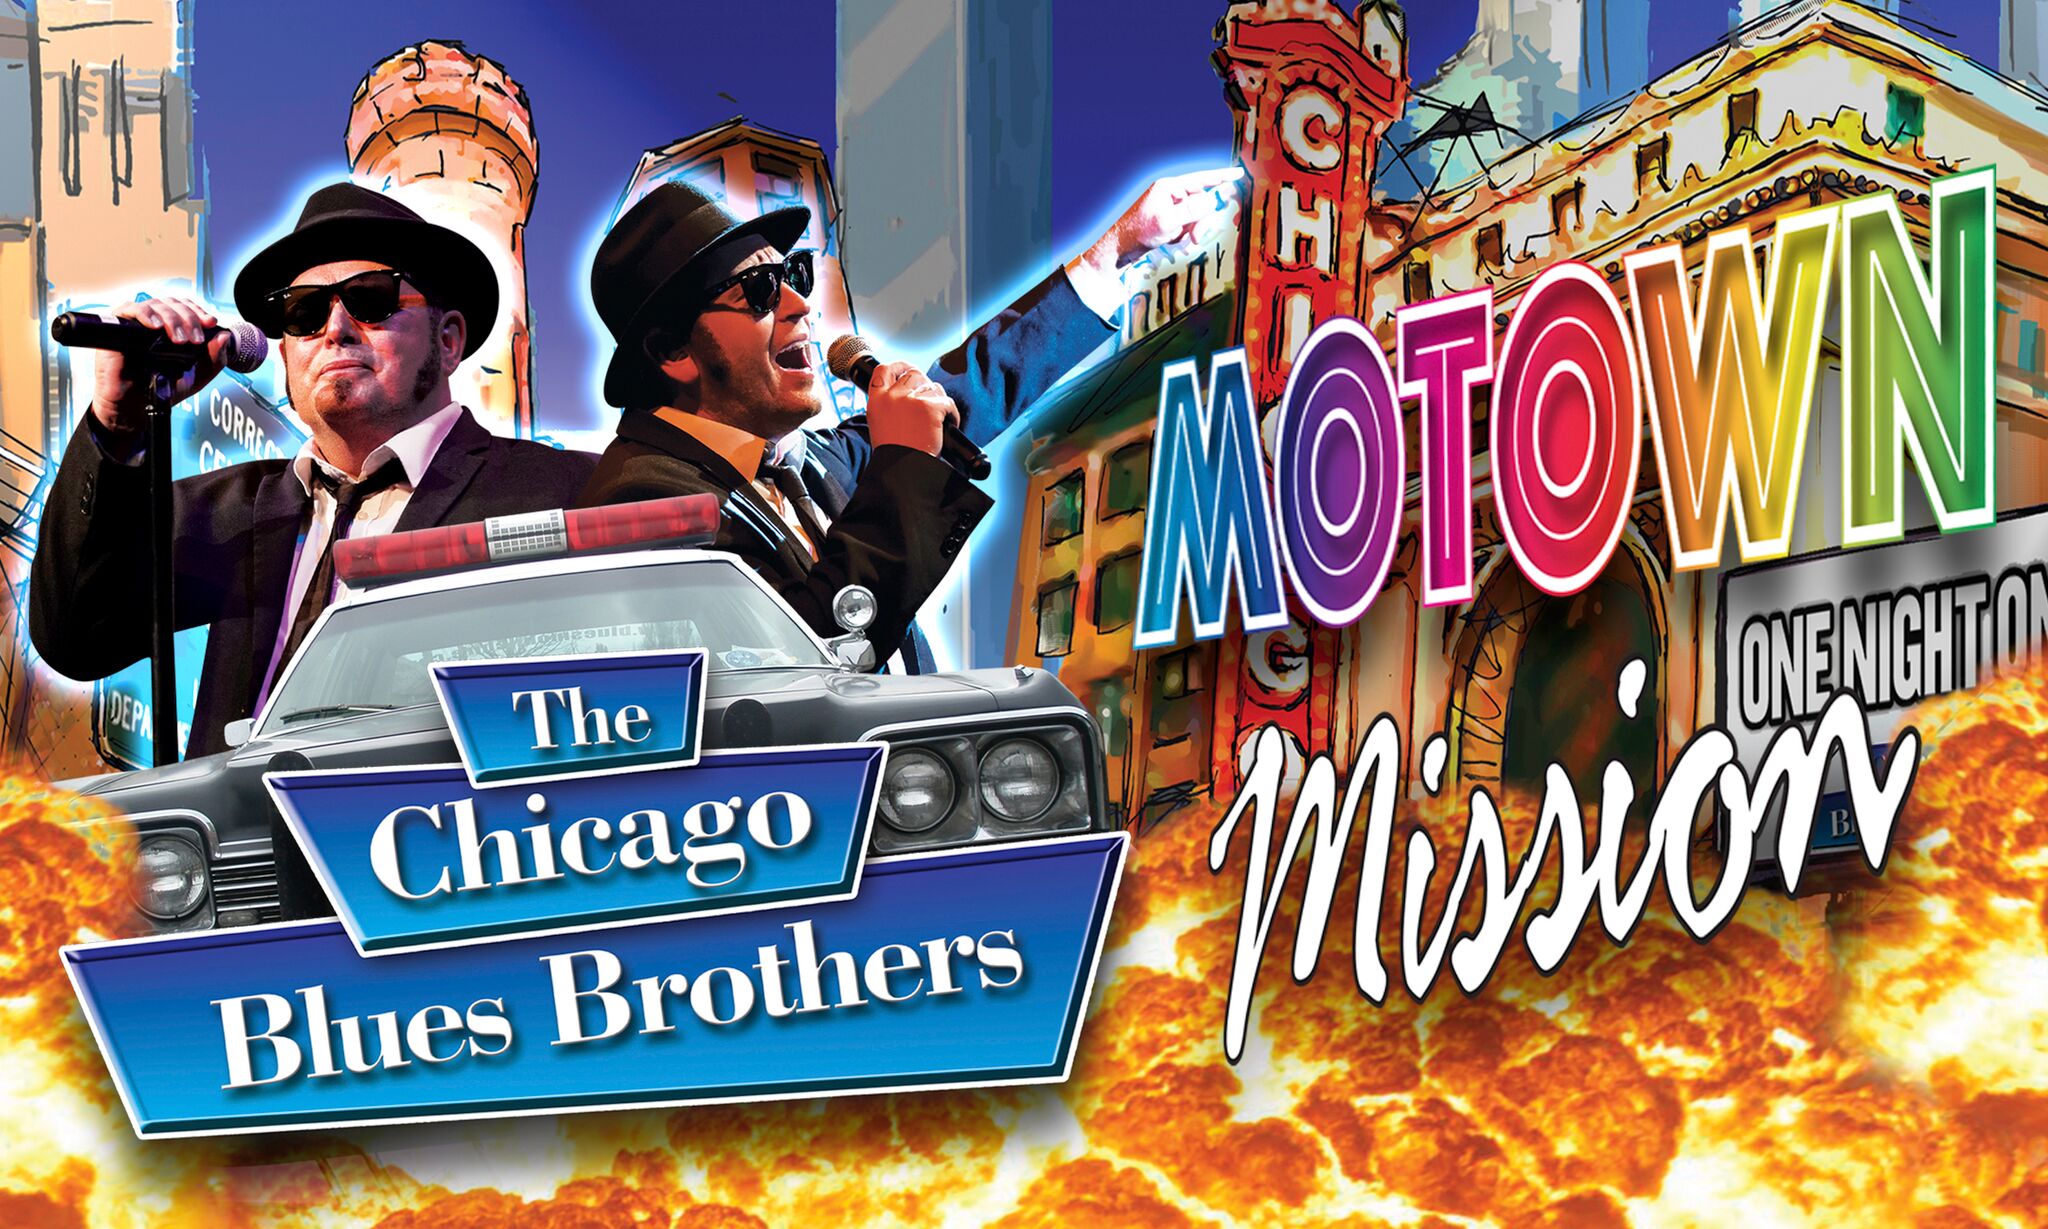 The Chicago Blues Brothers are coming to Eden Court next month